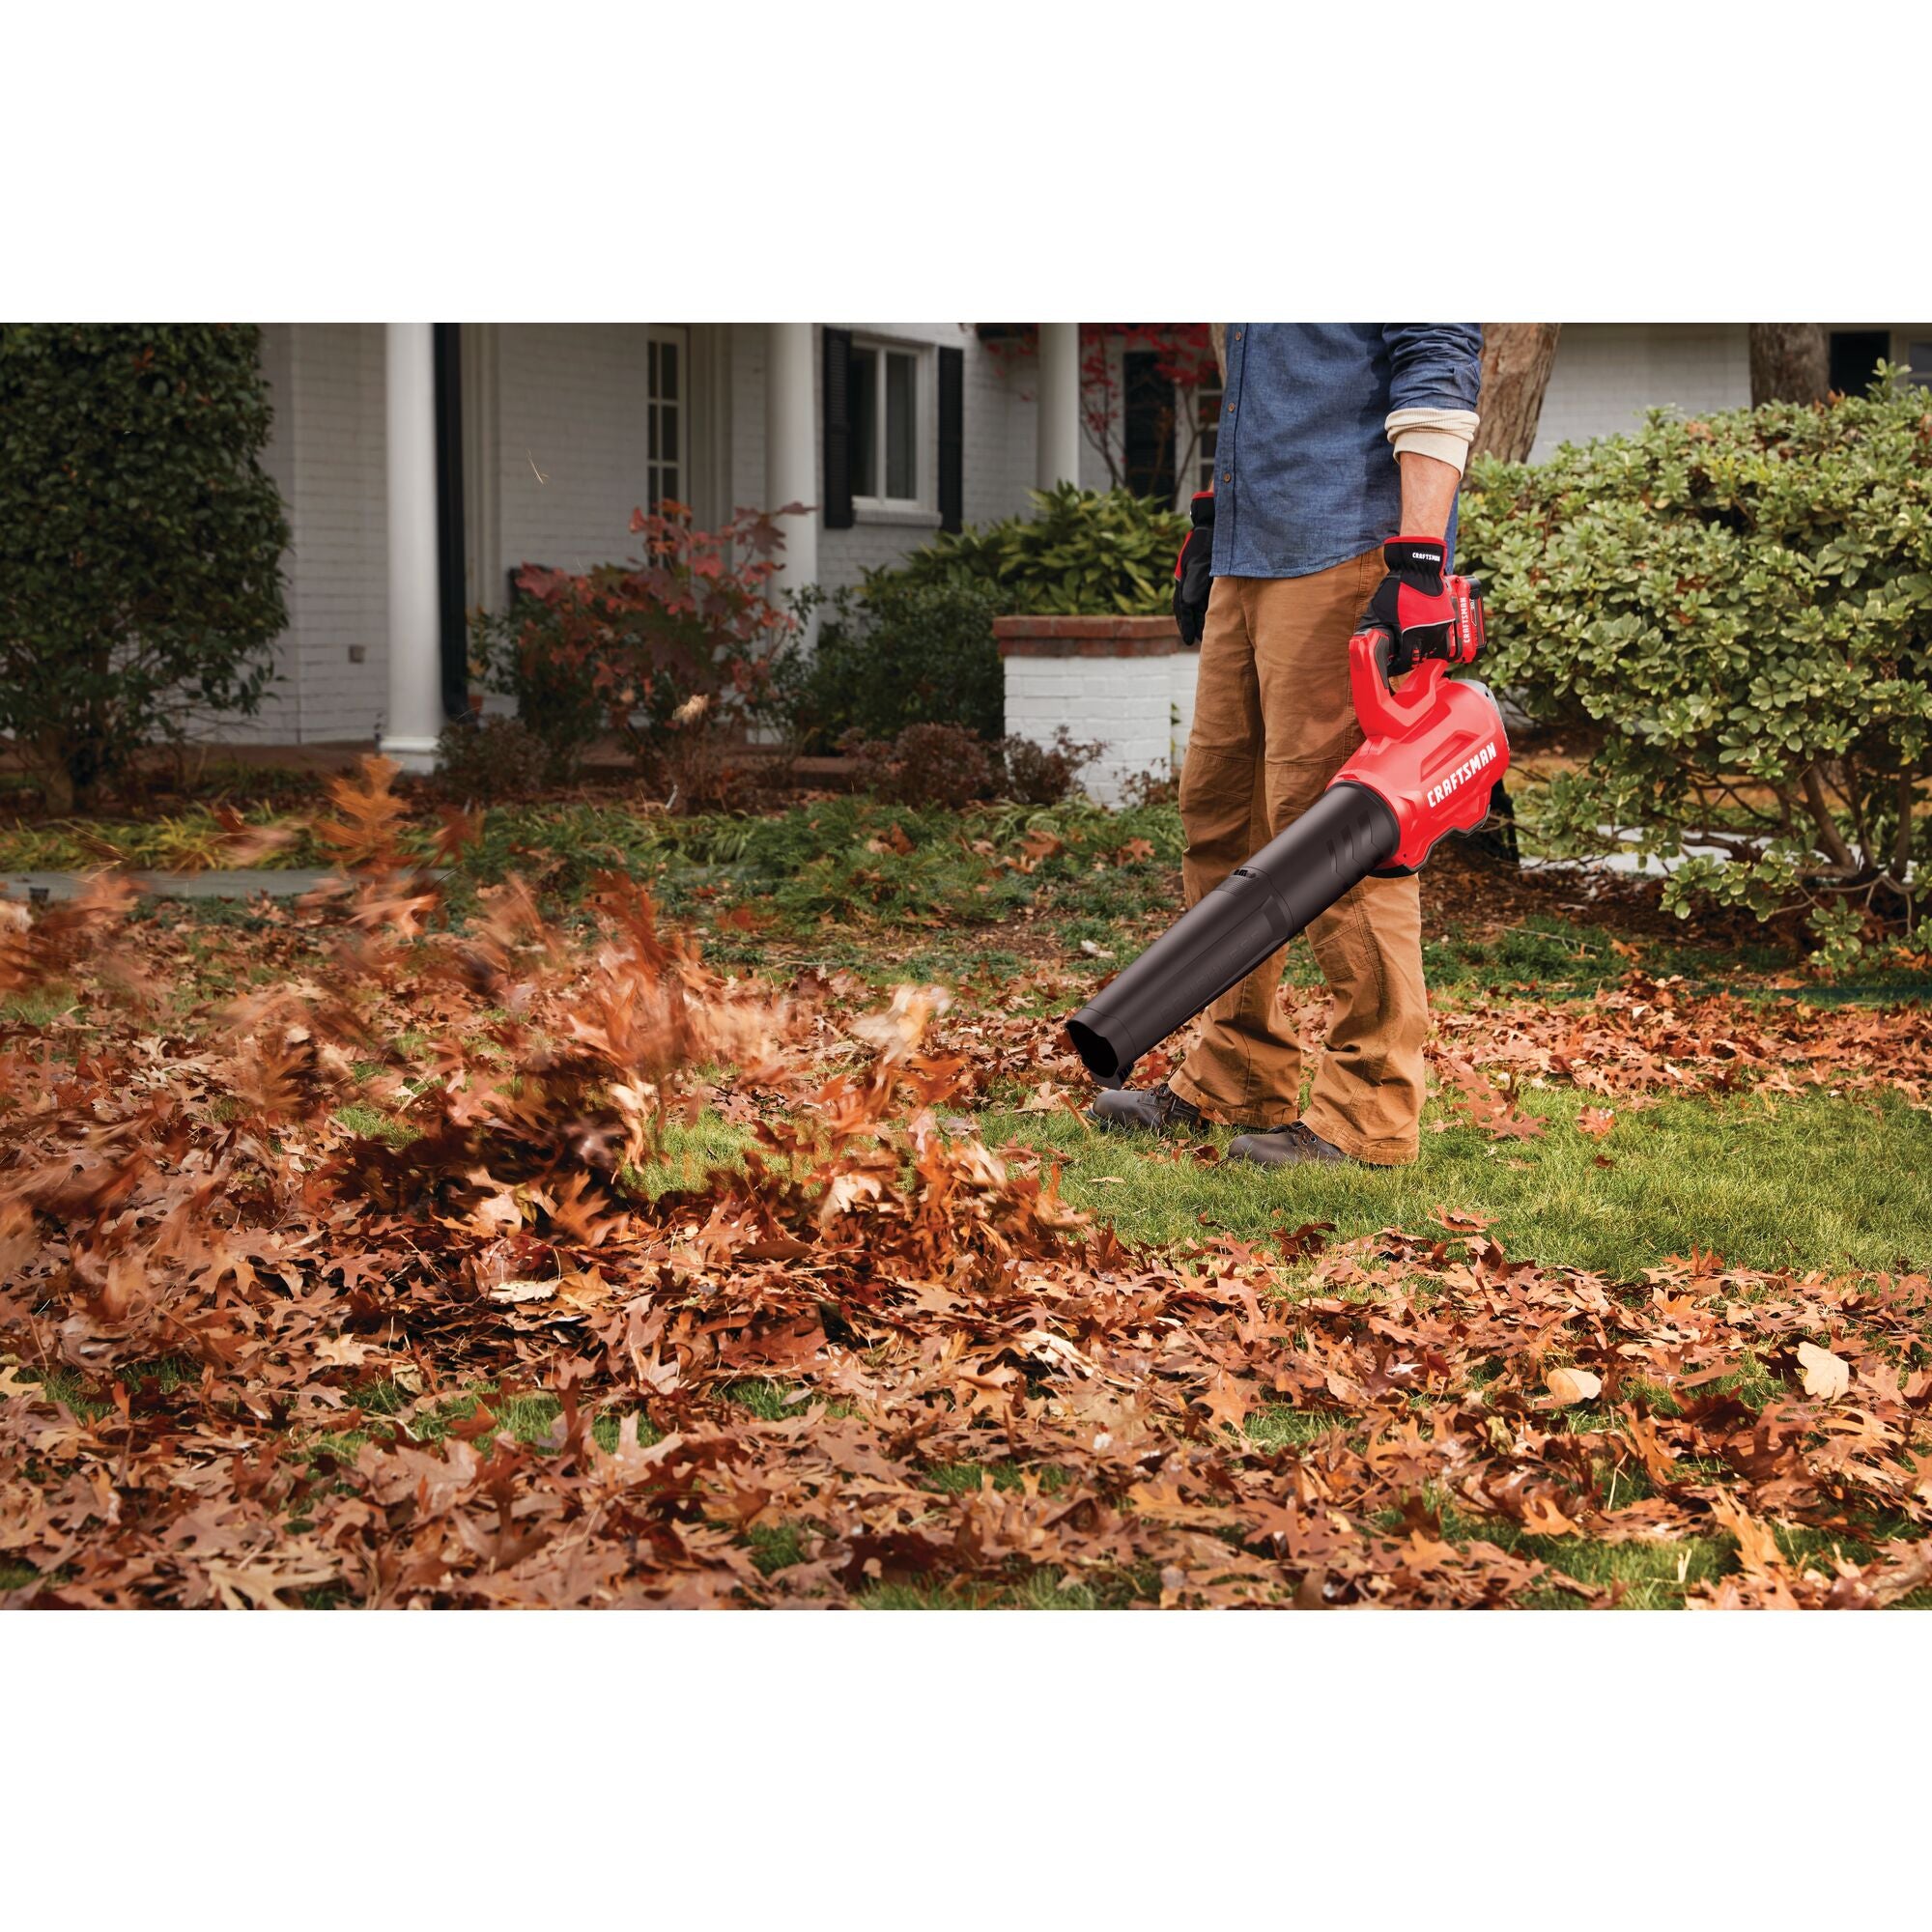 Brushless cordless axial blower being used for cleaning dead leaves from lawn.